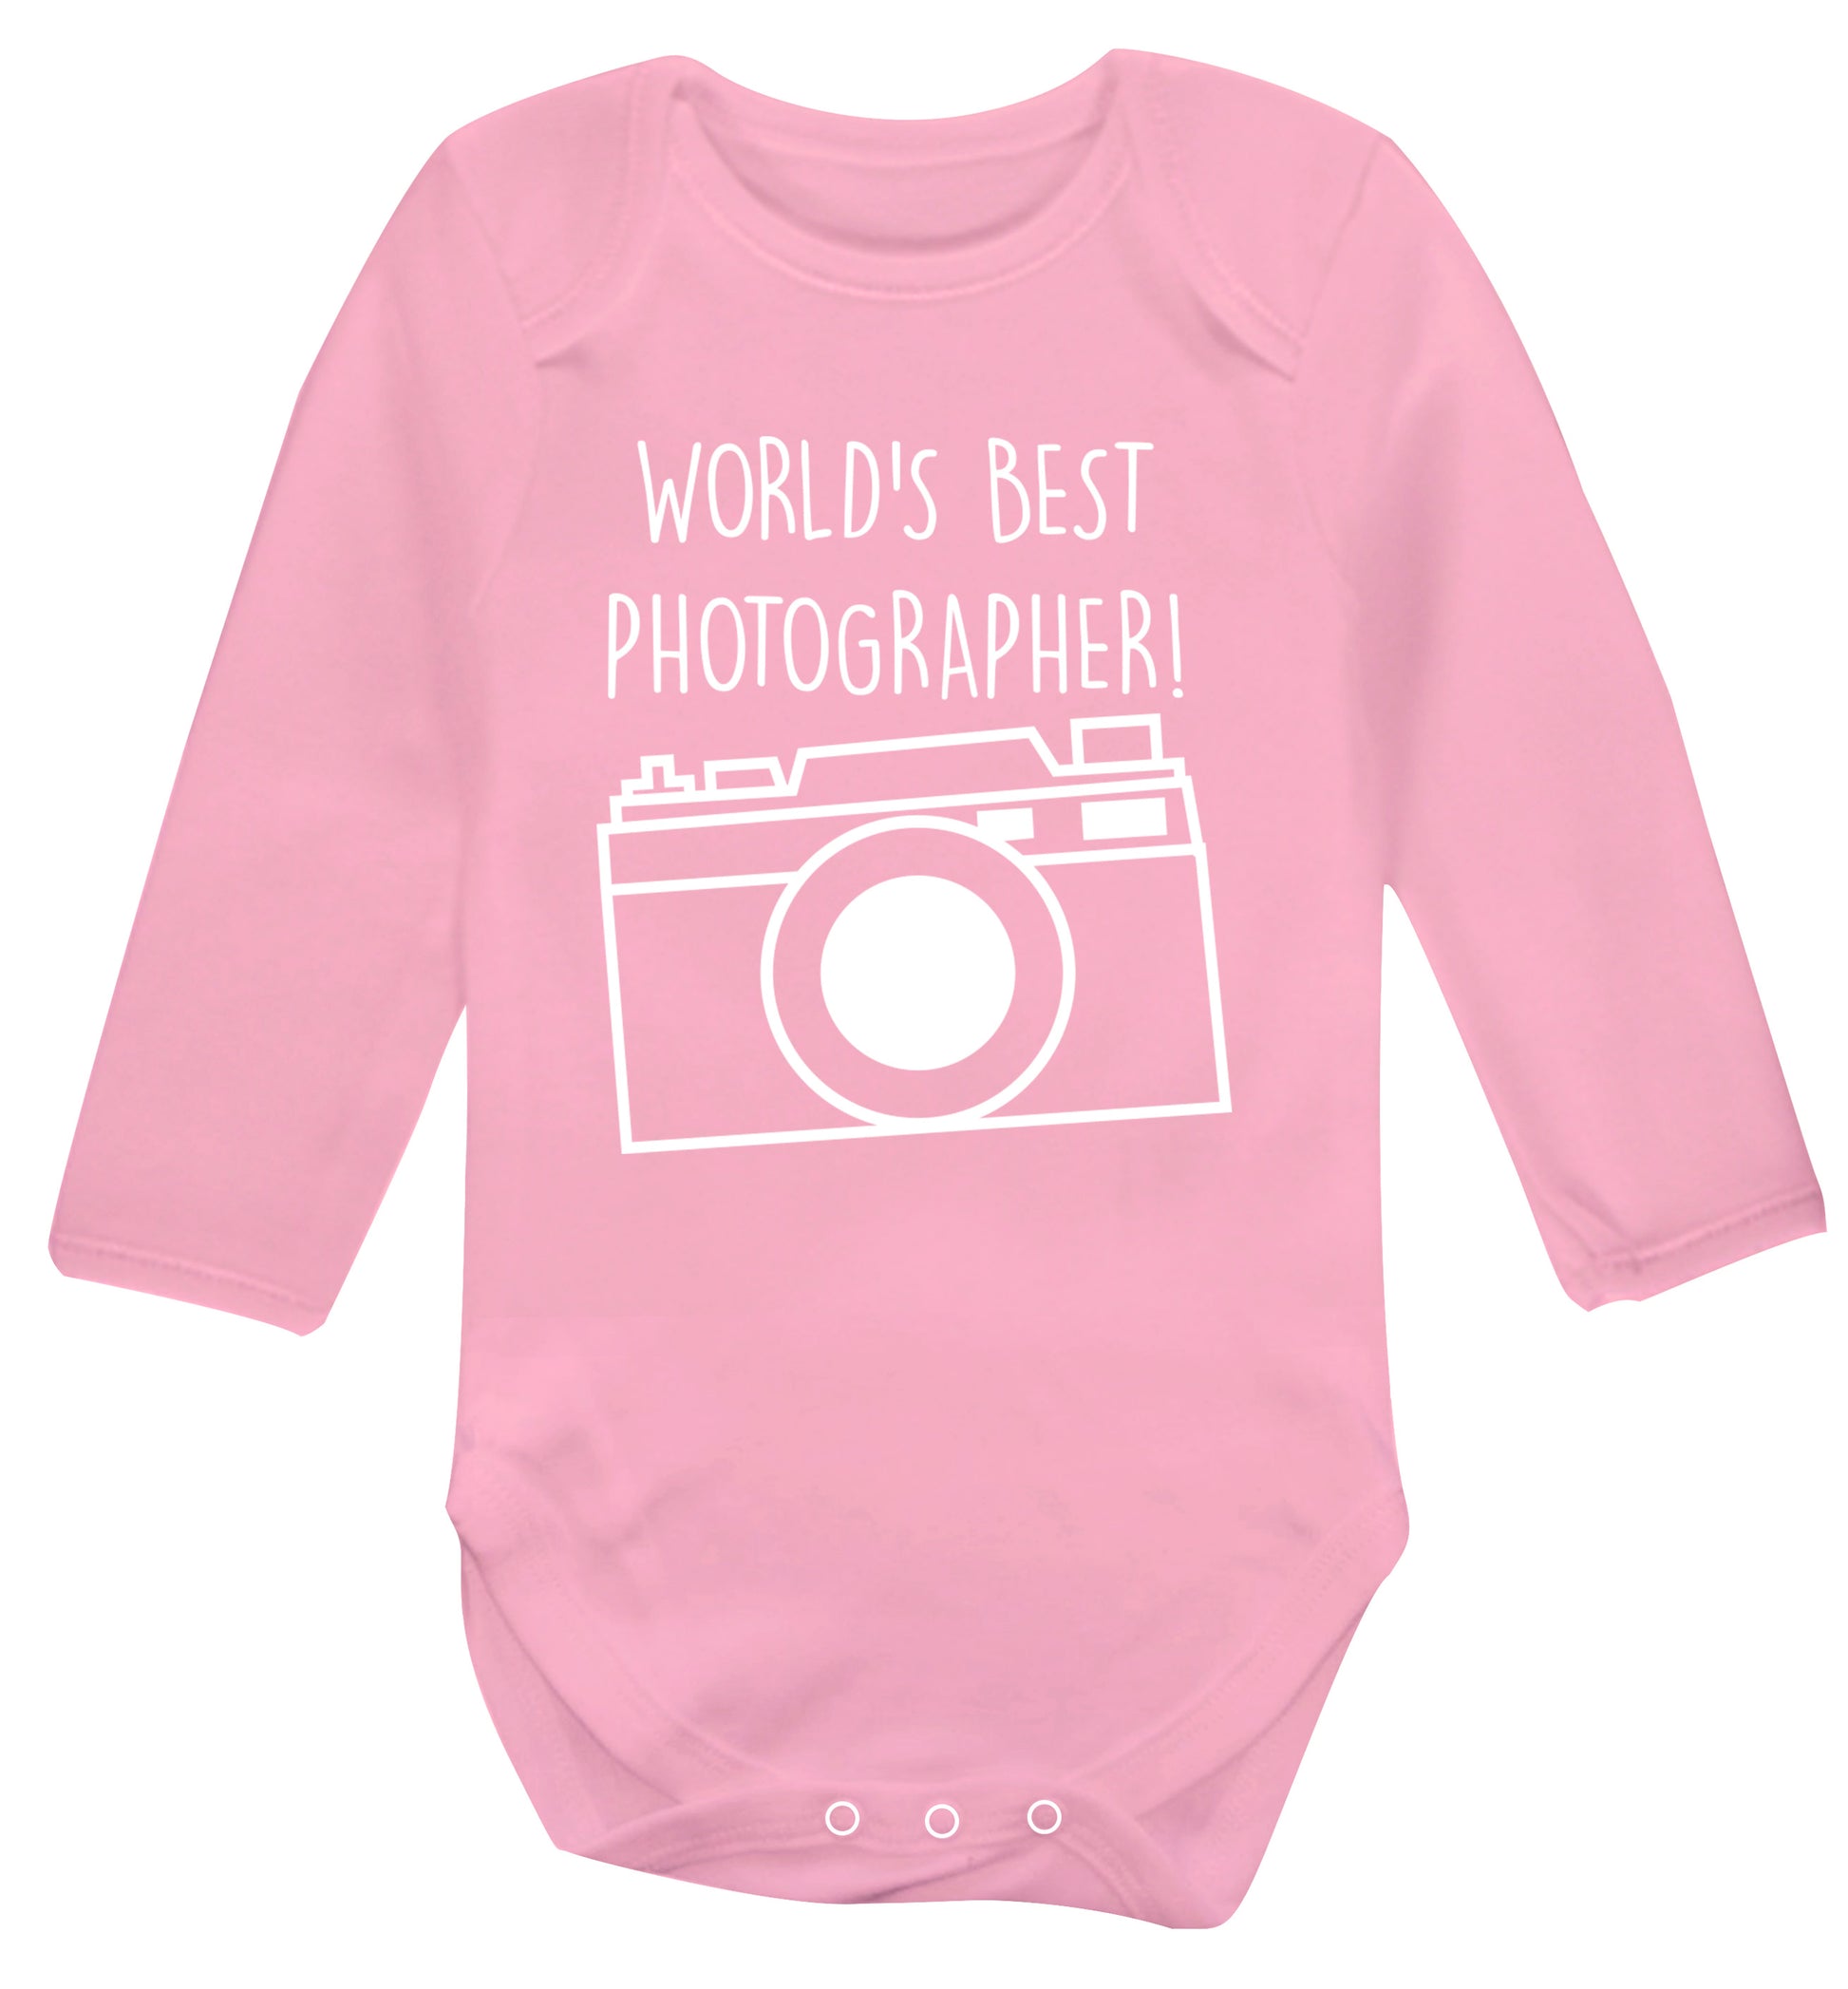 Worlds best photographer  Baby Vest long sleeved pale pink 6-12 months